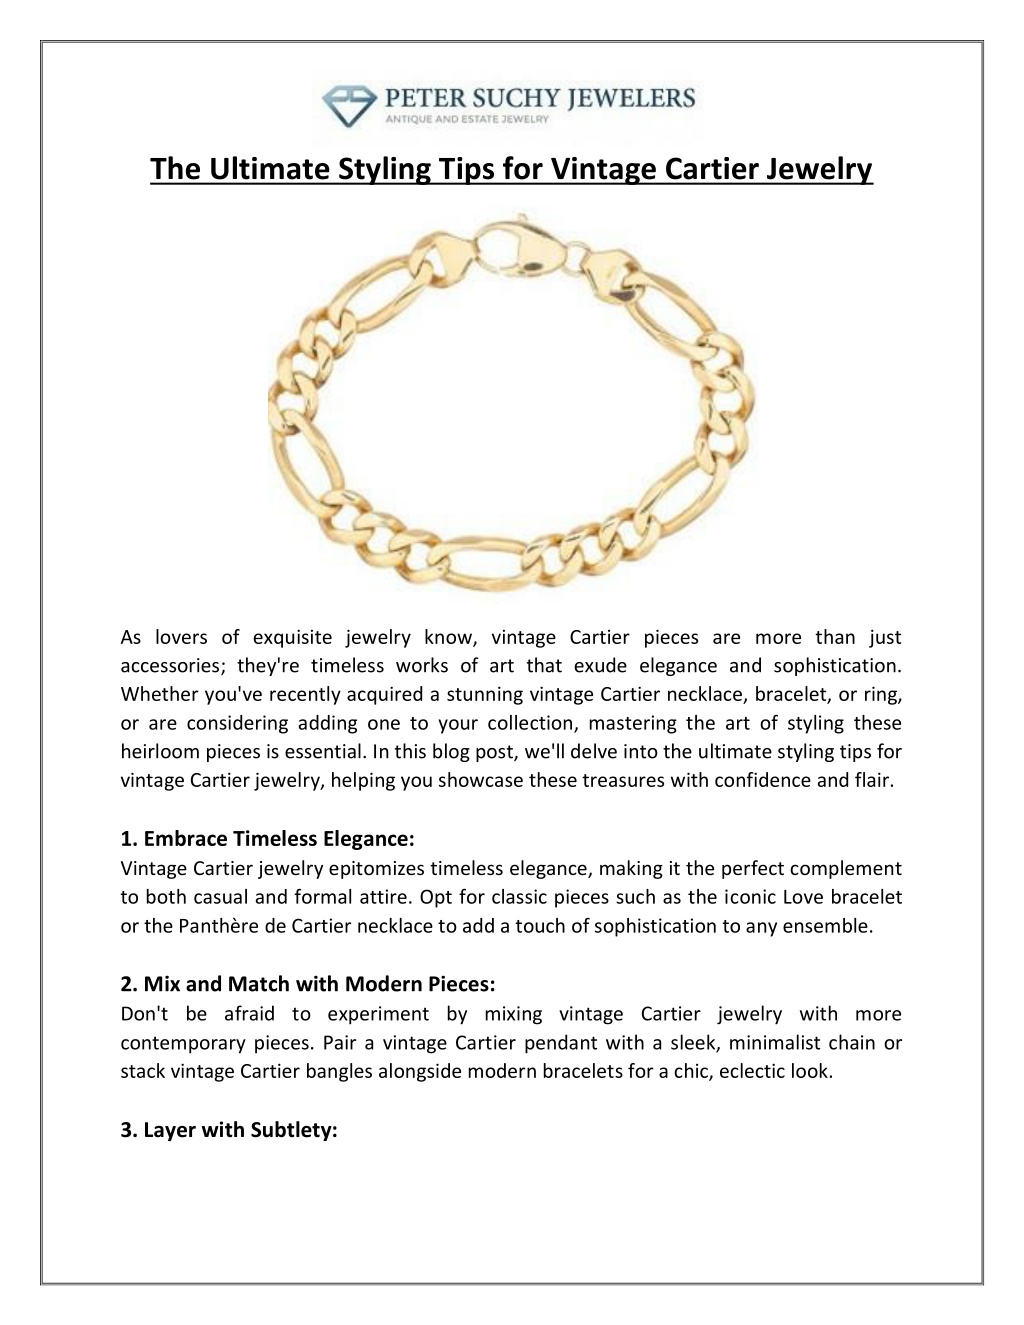 PPT - The Ultimate Styling Tips for Vintage Cartier Jewelry PowerPoint ...